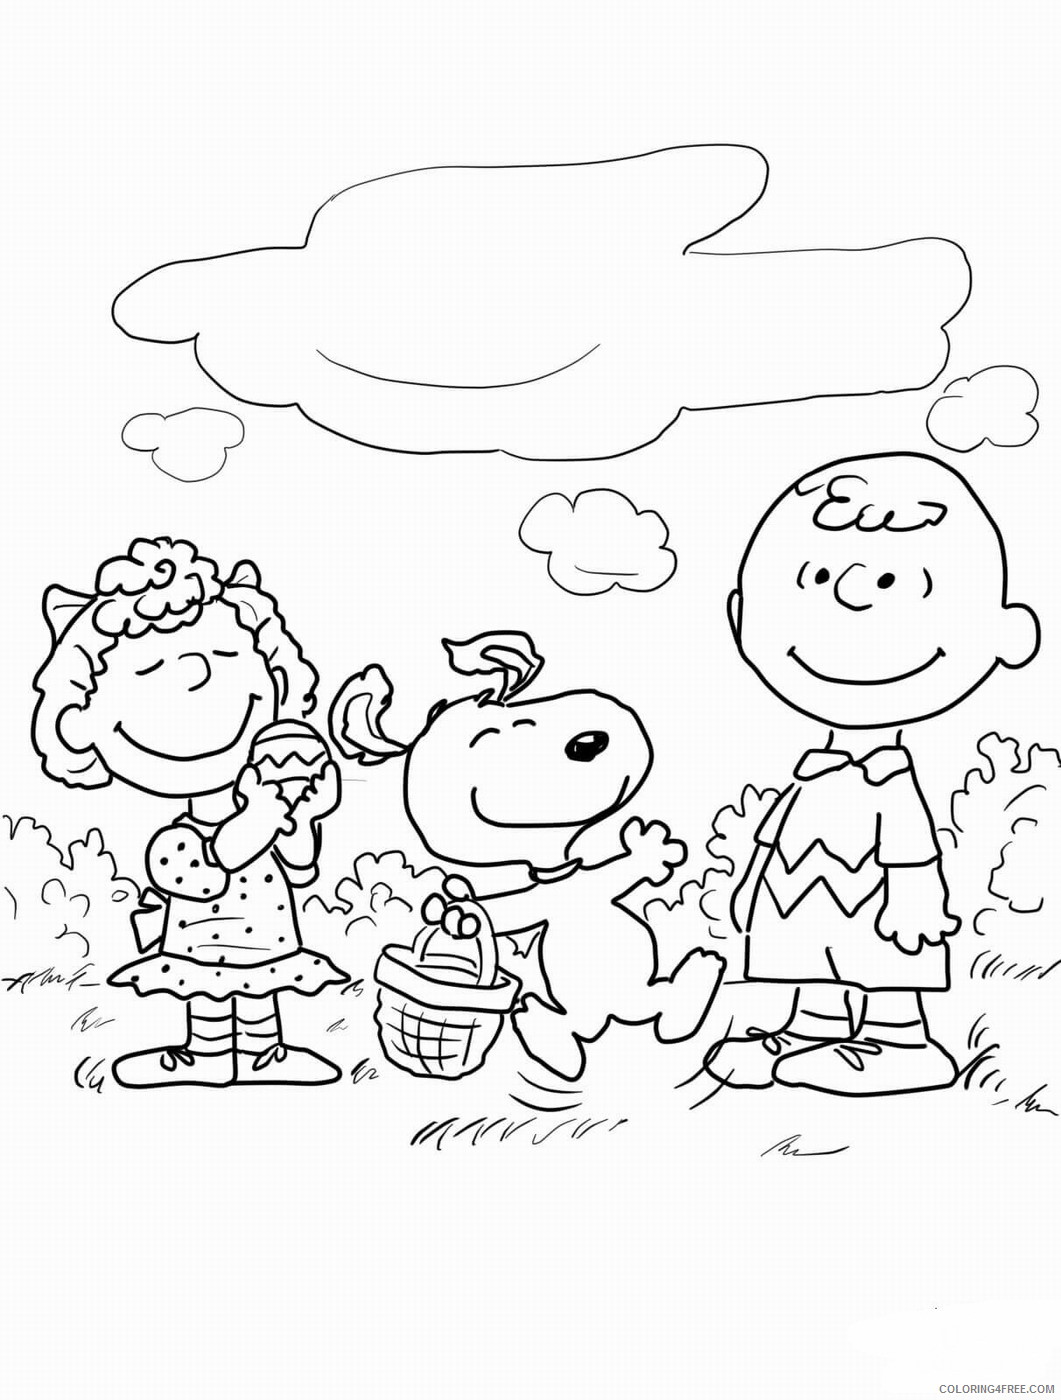 Peanuts Coloring Pages Cartoons peanut movie_8 Printable 2020 4805 Coloring4free